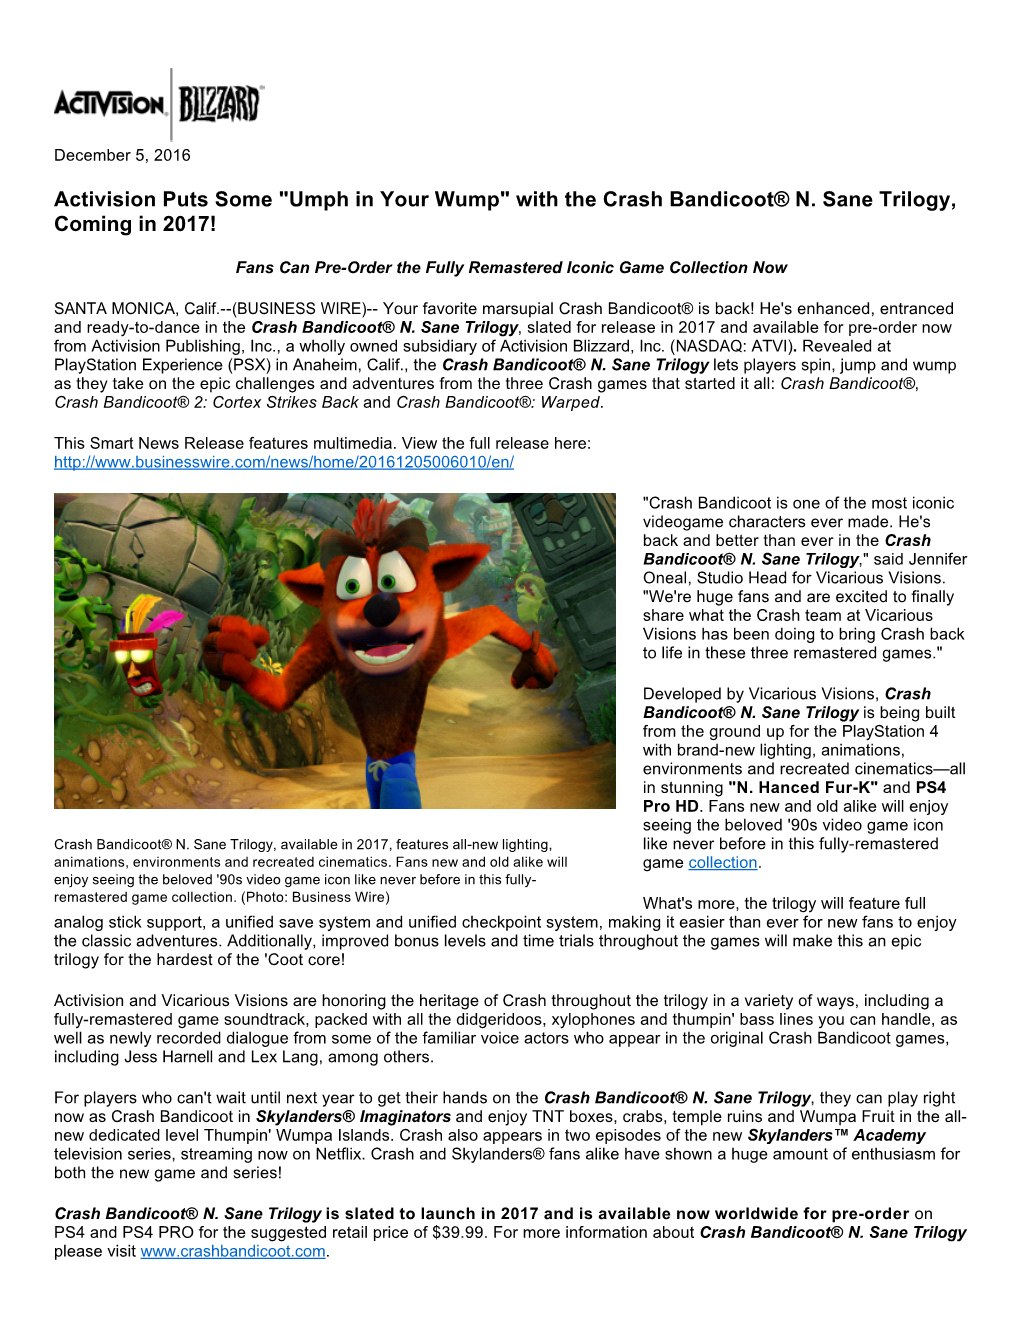 With the Crash Bandicoot® N. Sane Trilogy, Coming in 2017!